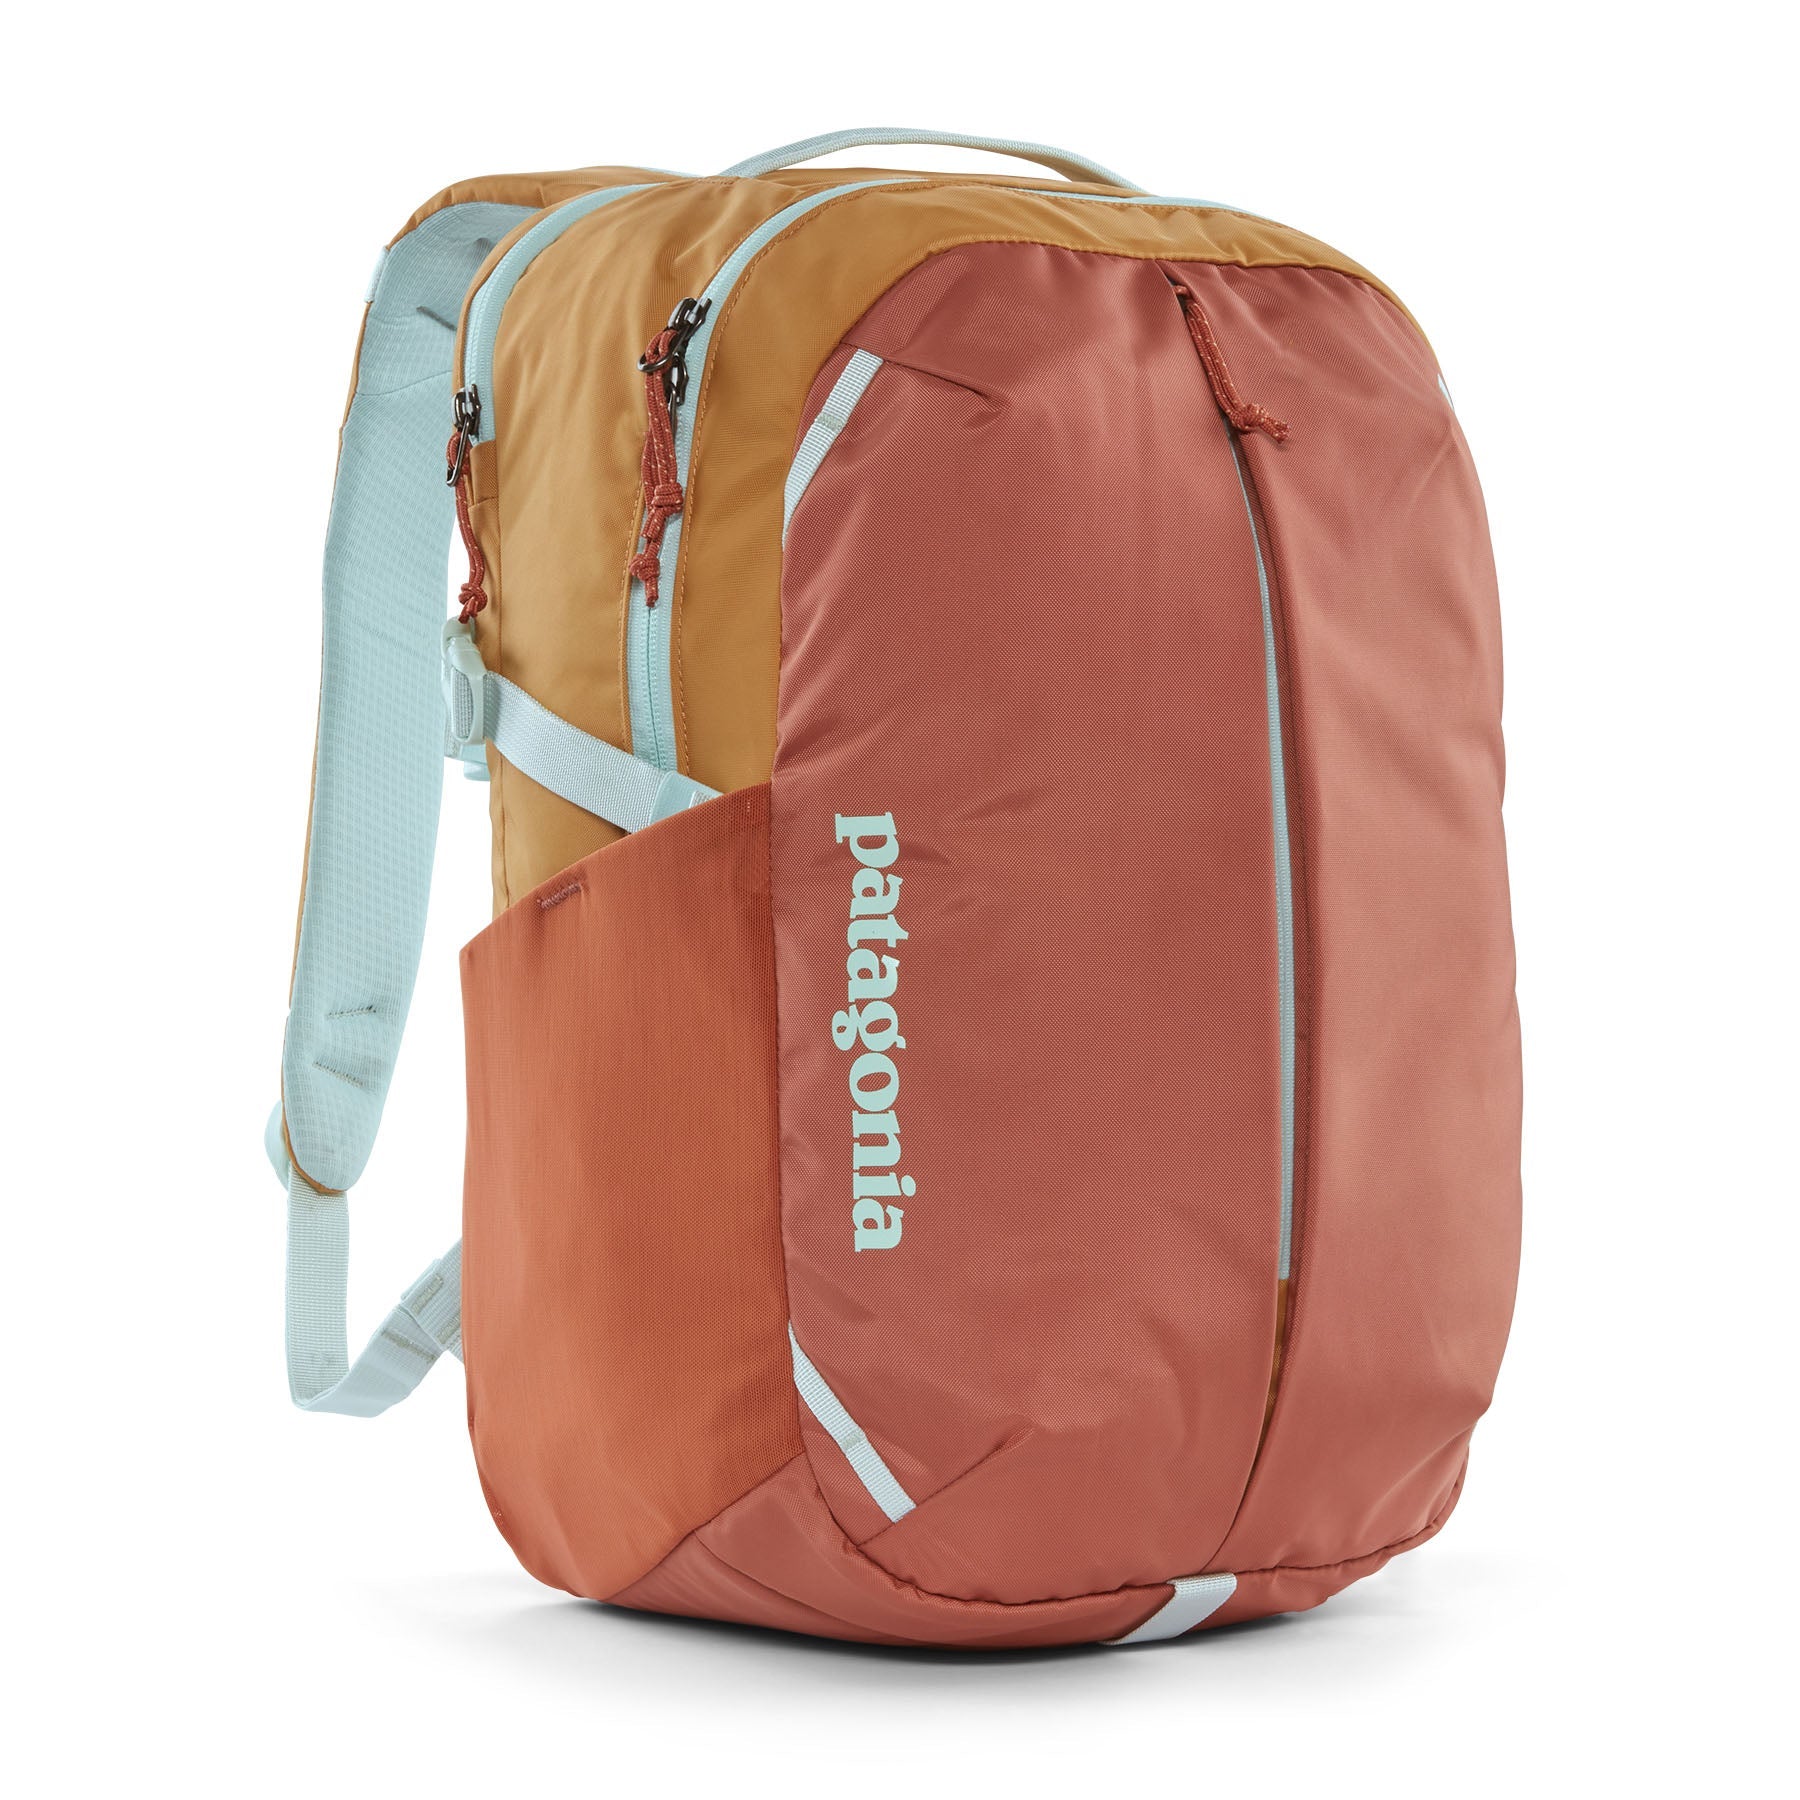 Patagonia 18. PACKS - DAYBAG Refugio Day Pack 26L SINY SIENNA CLAY